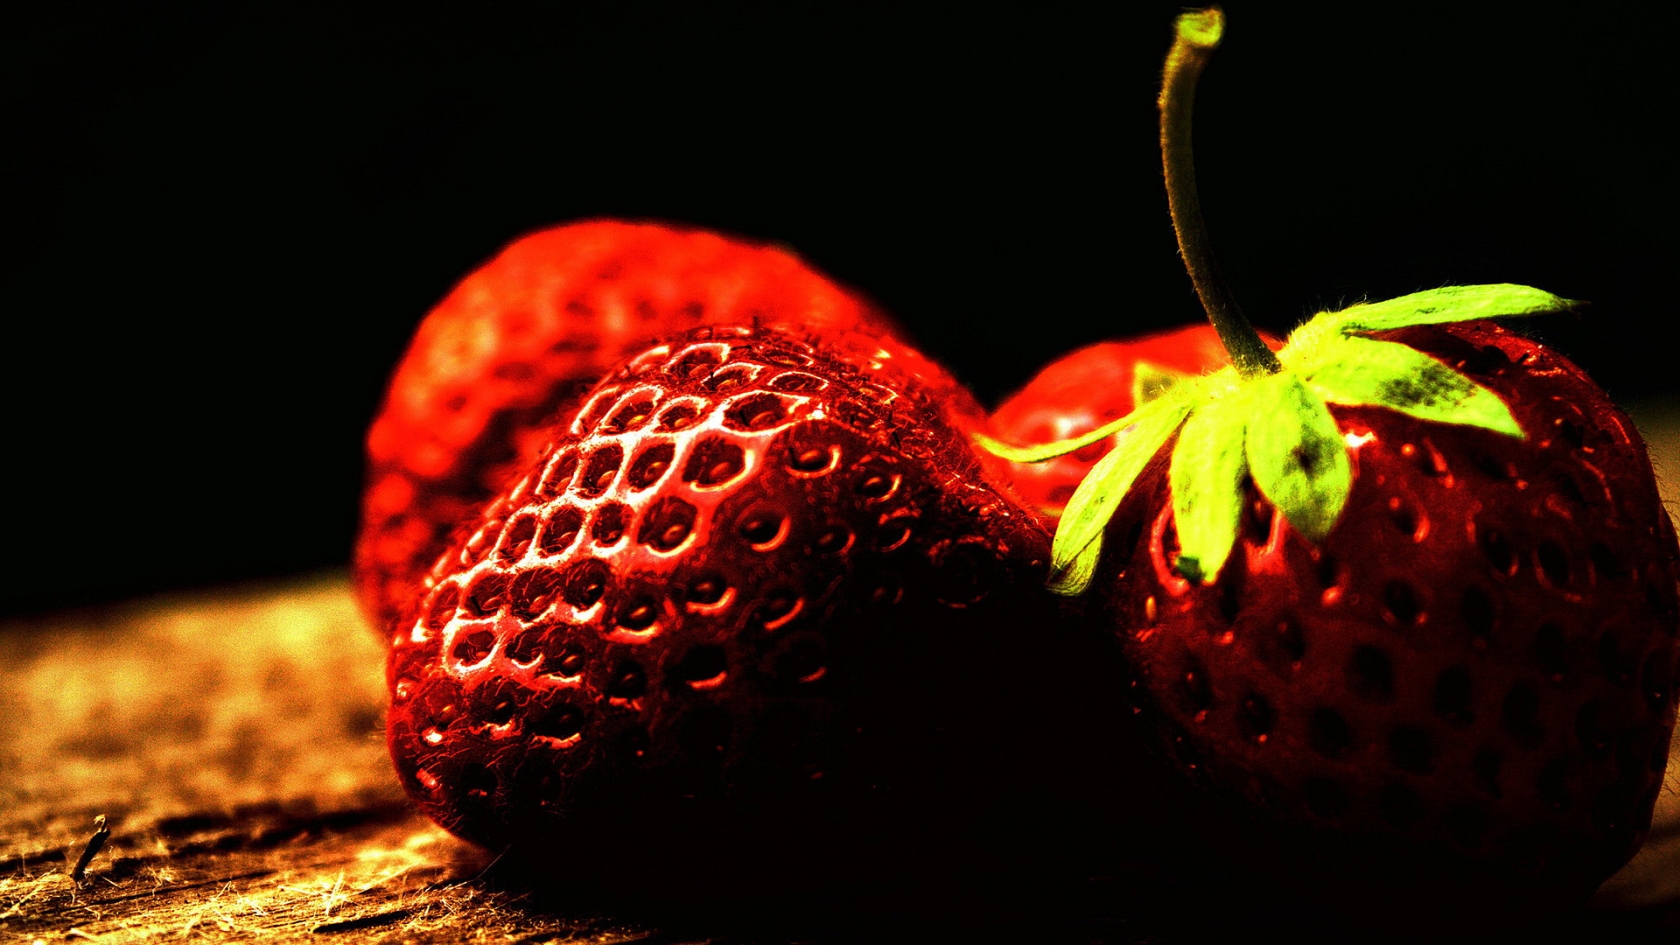 Two ripe strawberries for 1680 x 945 HDTV resolution